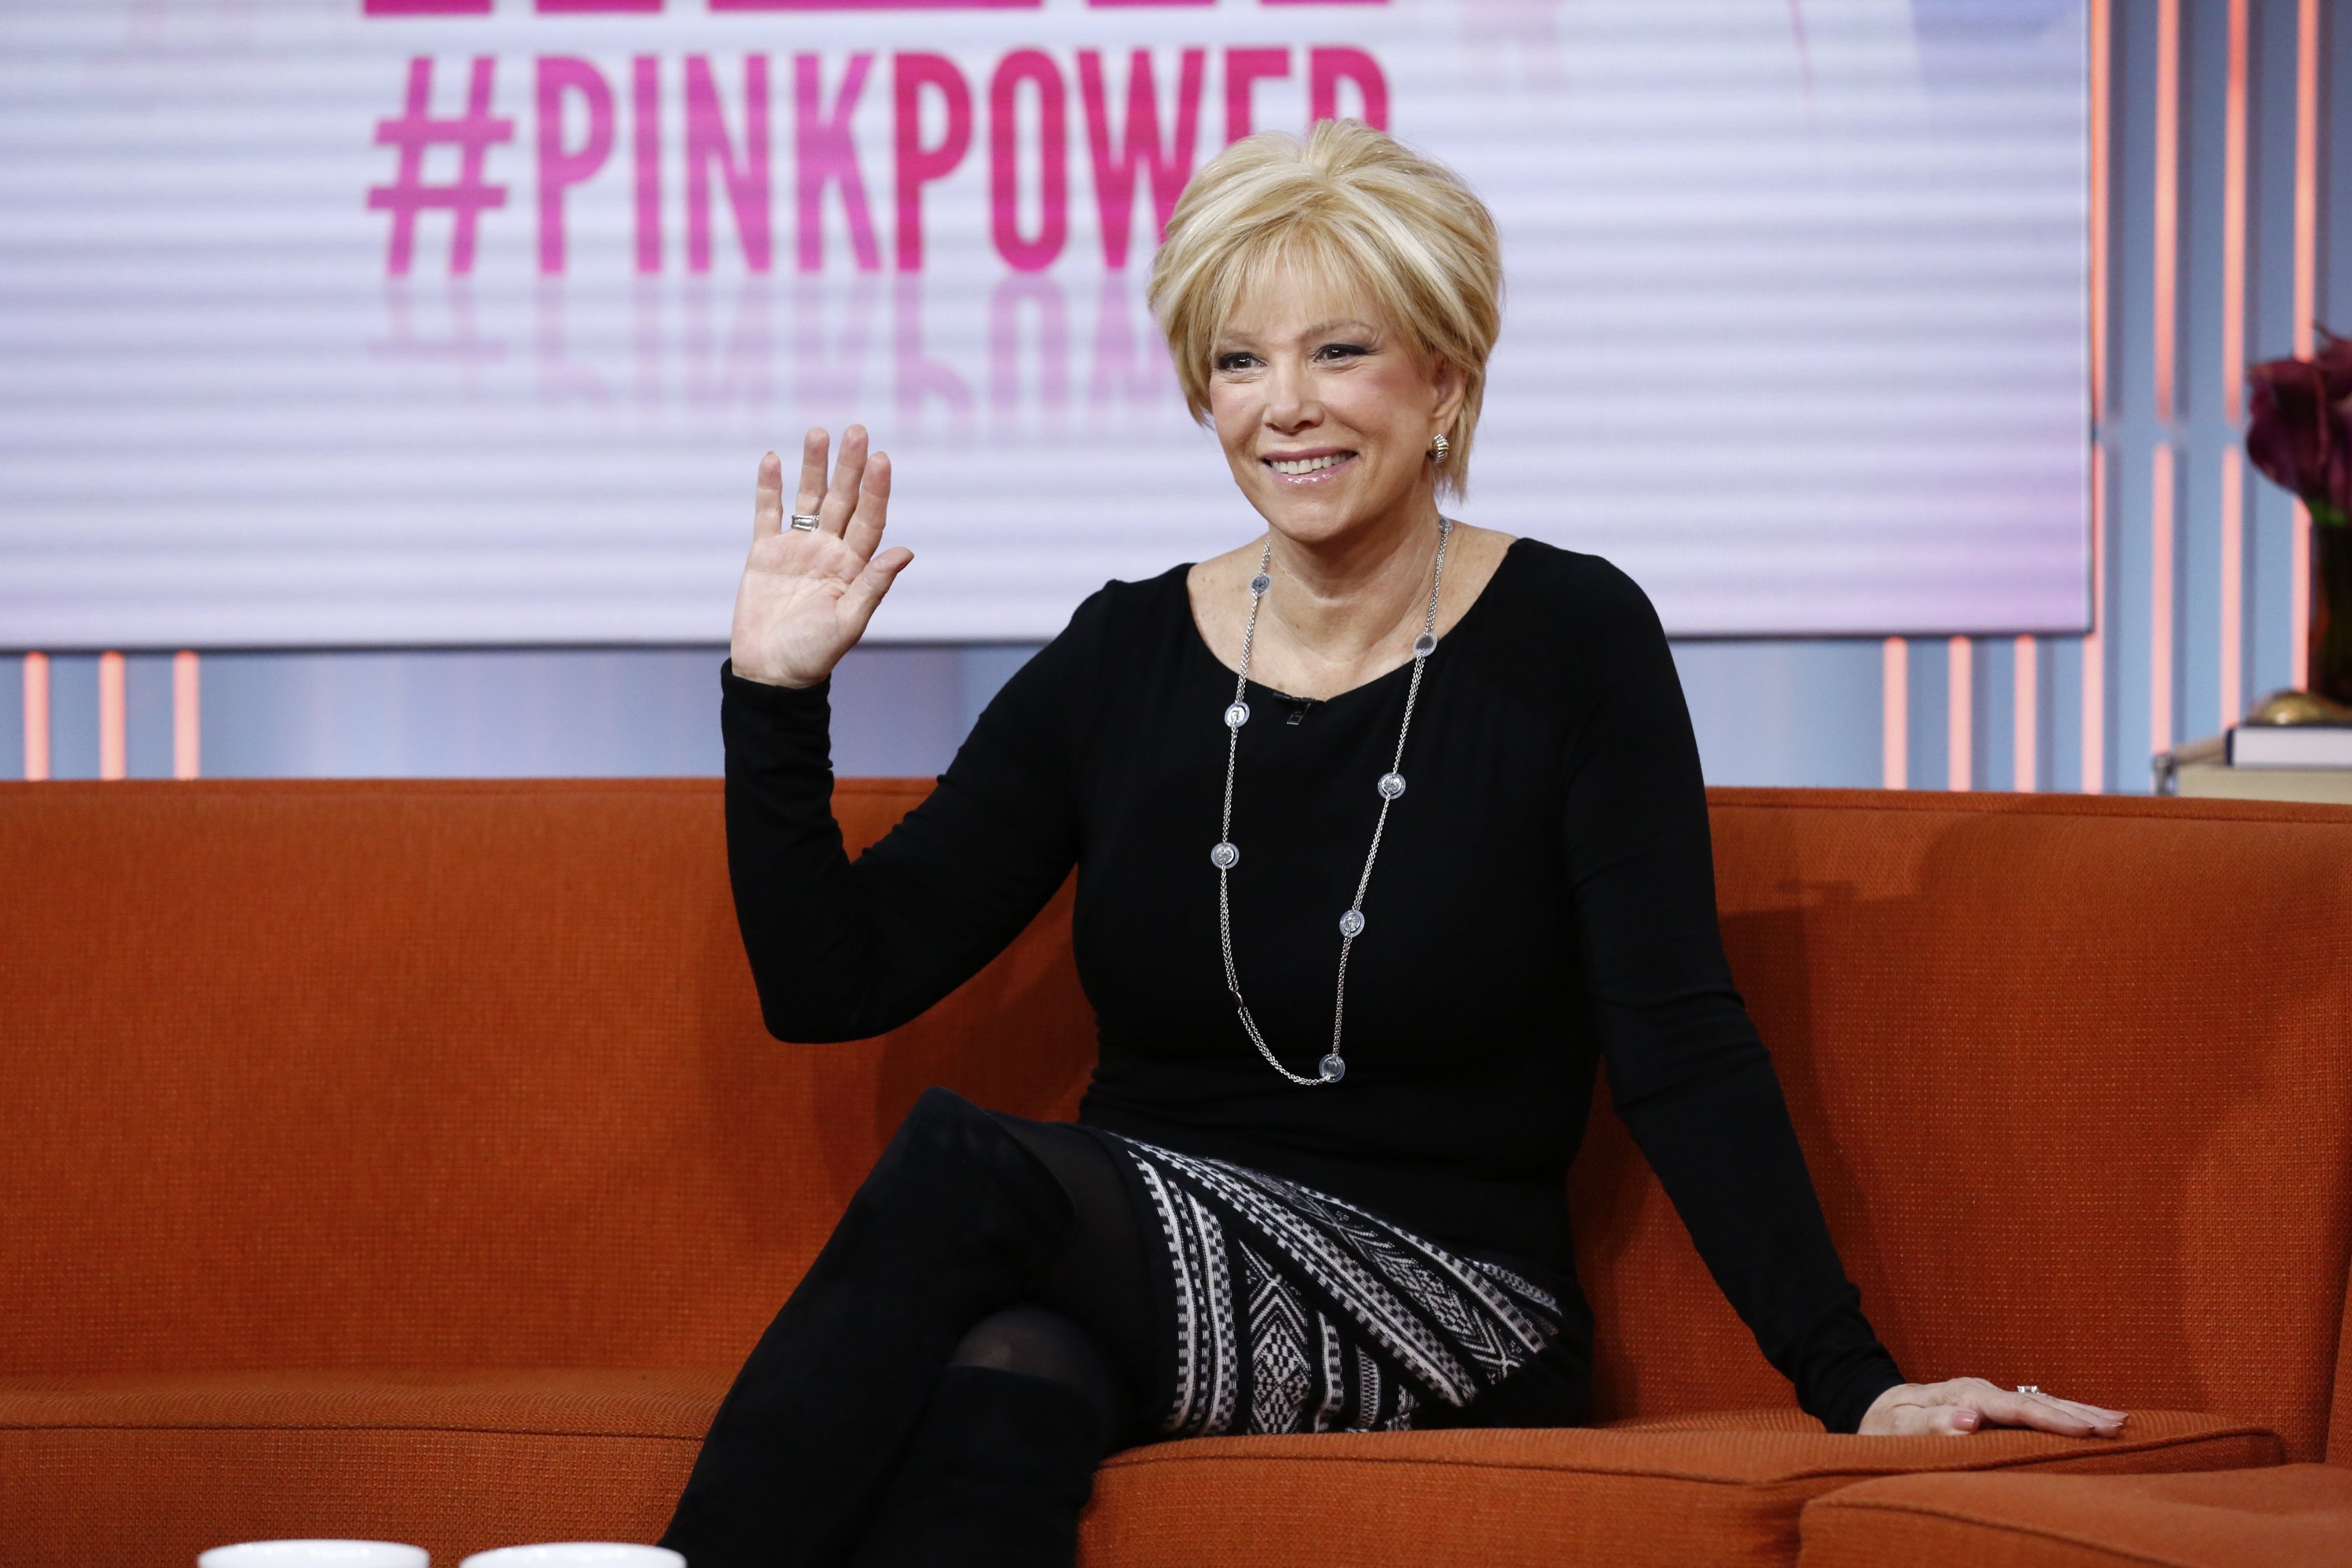 Joan Lunden on October 30, 2014 on the "Today" show | Source: Getty Images